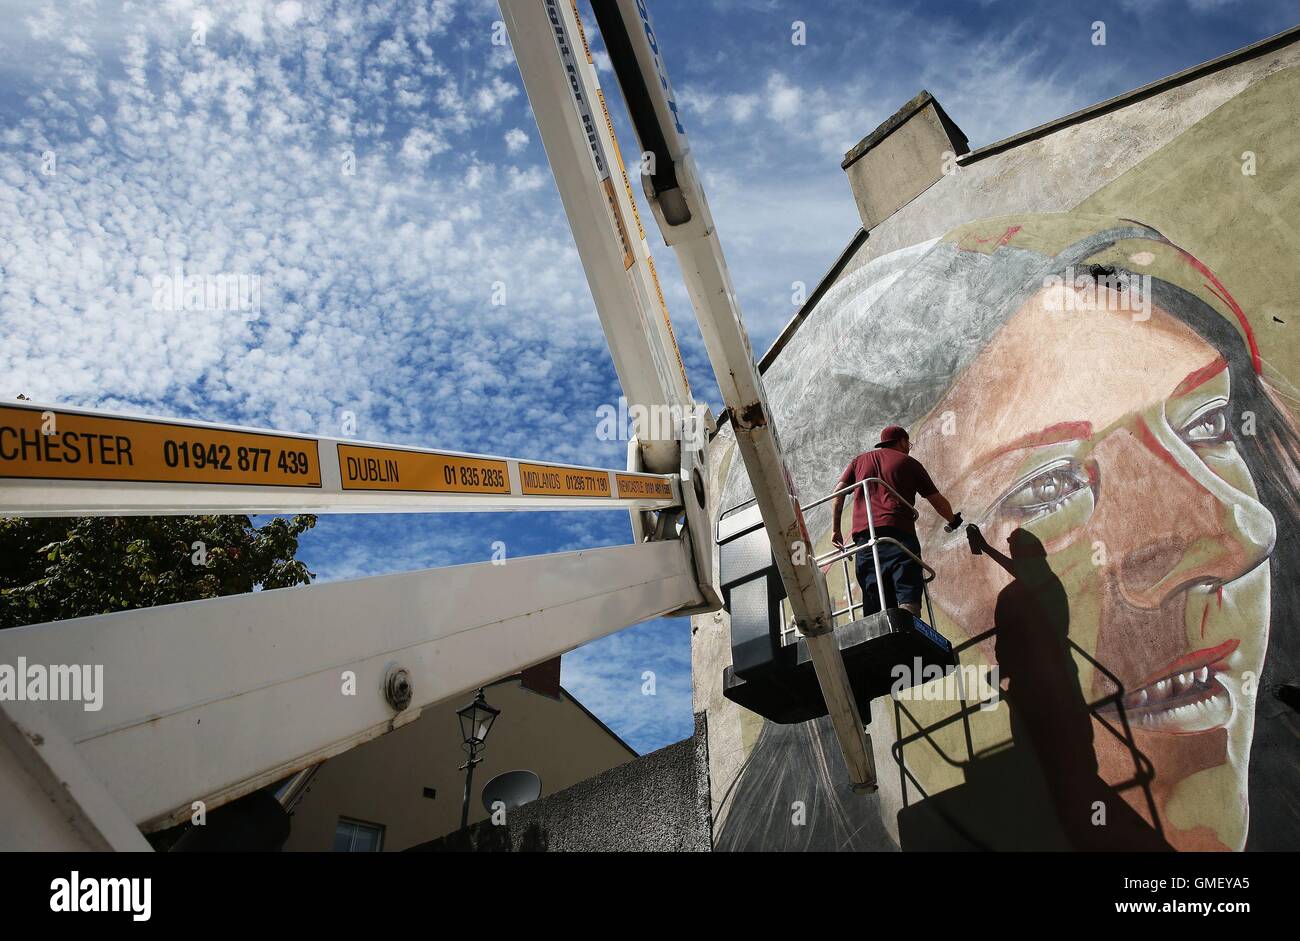 Australian artist Smug One works on a mural on Barrack street , which forms part of the Waterford Walls graffiti and street art festival taking place between 25 and 28 August in Waterford city, Ireland. Stock Photo